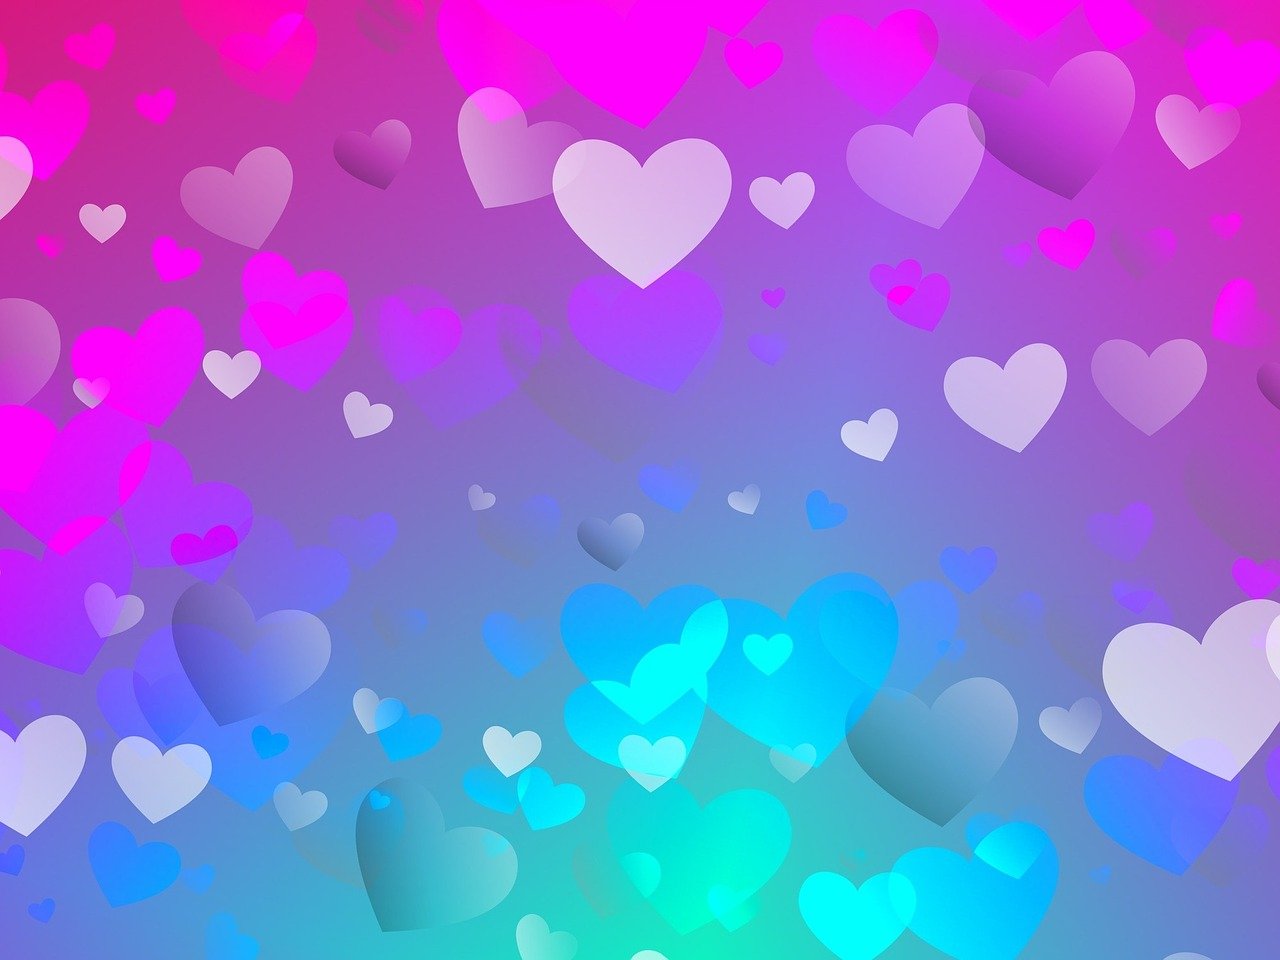 a bunch of hearts on a pink and blue background, a picture, inspired by Peter Alexander Hay, computer art, gradient and patterns wallpaper, colorful dark vector, bokeh iridescent accents, smooth stylized shapes